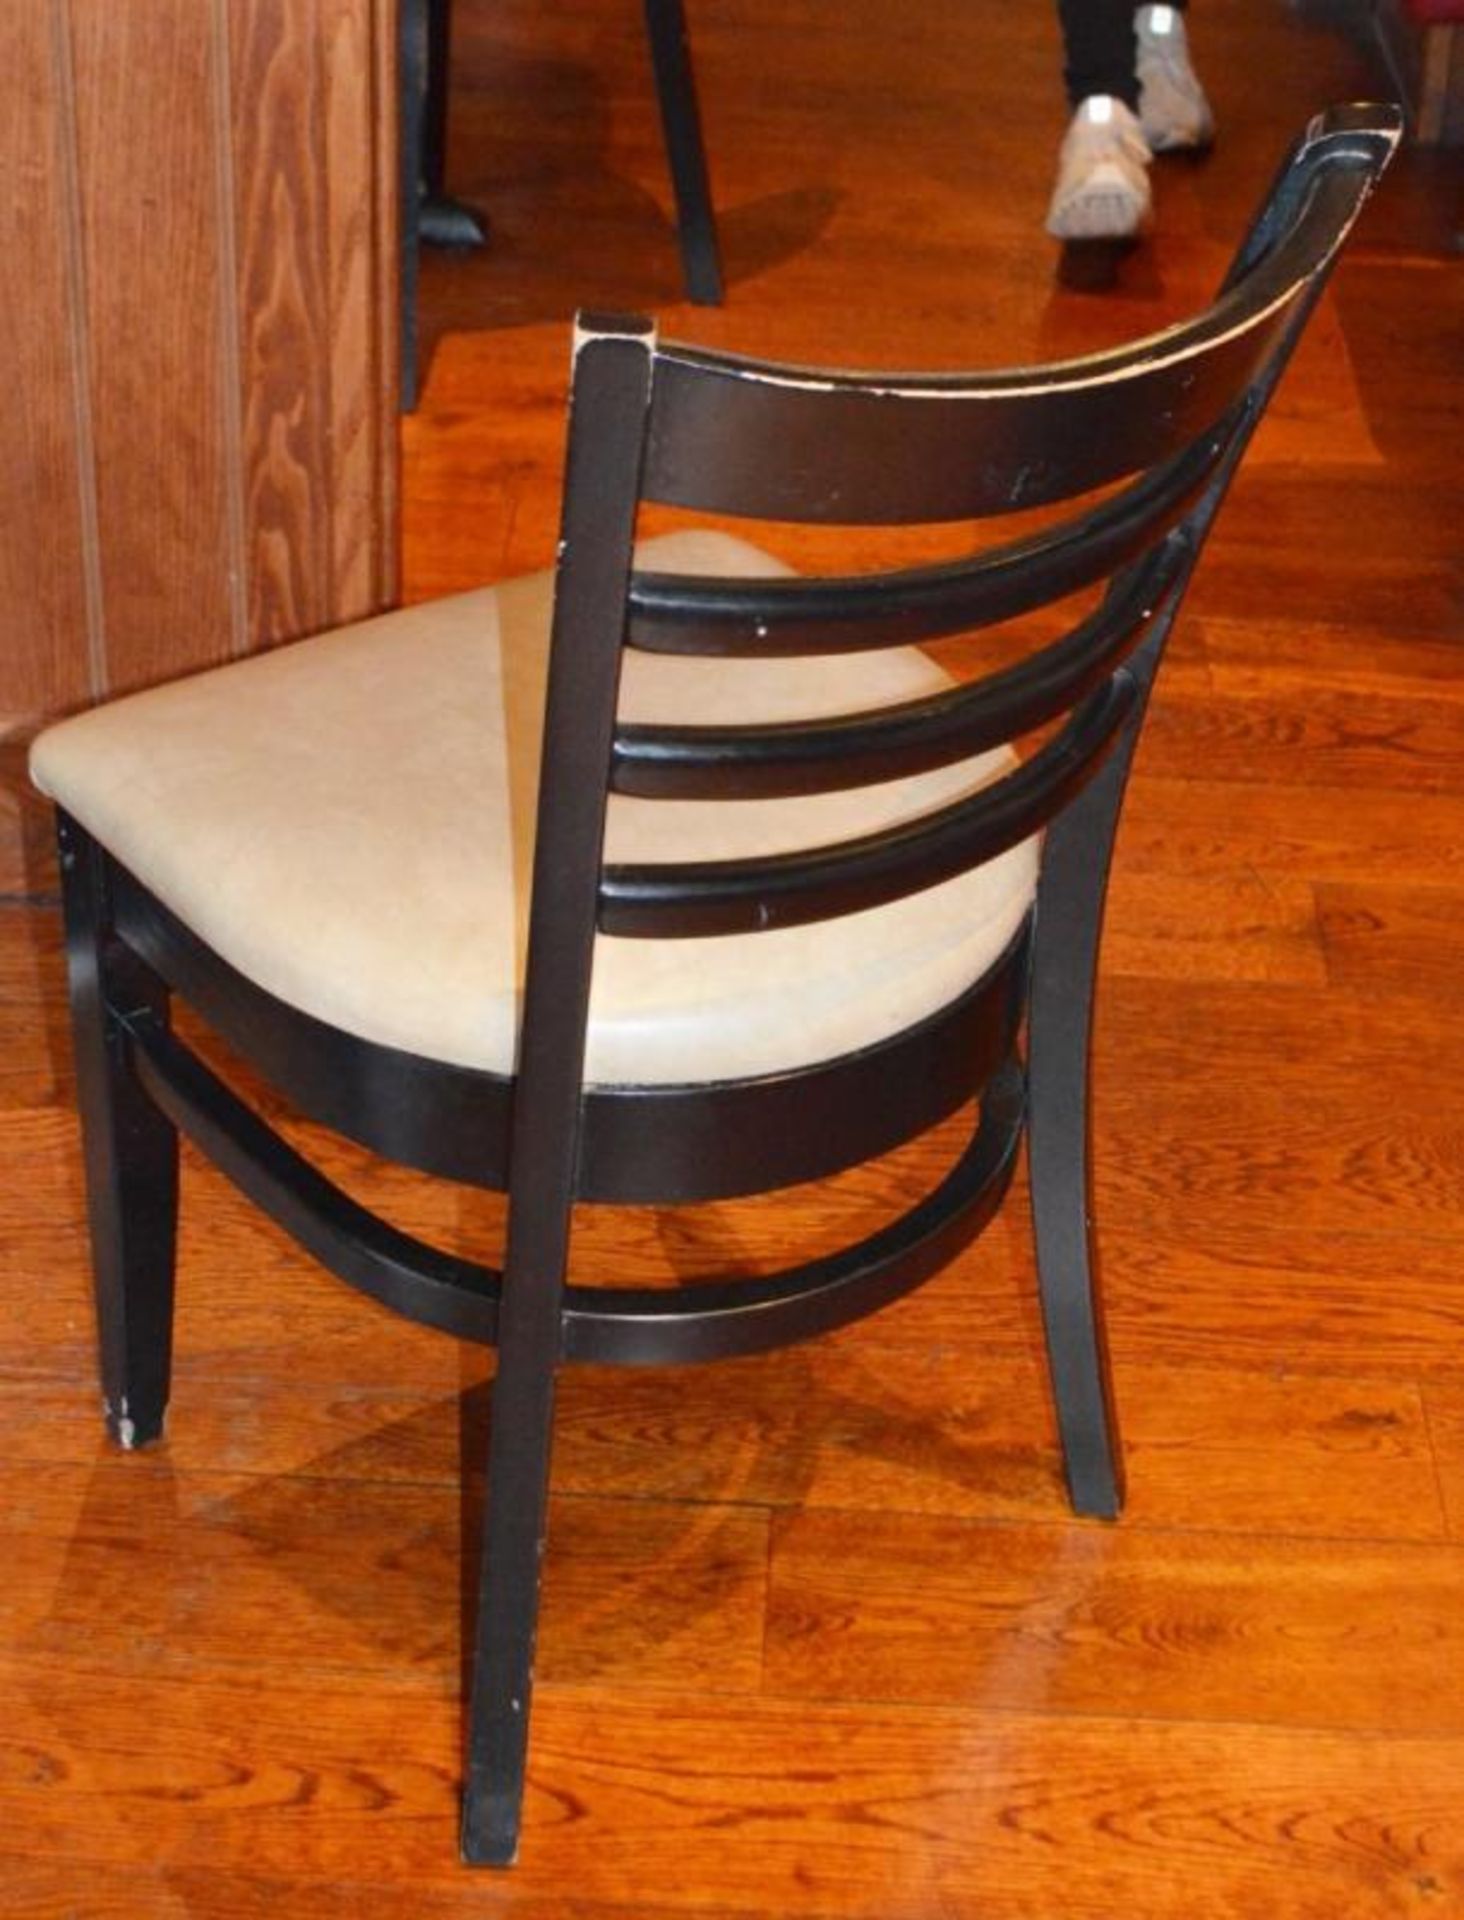 15 x Ladderback Wooden Dining Chairs With Black Finish and Cream Faux Leather Seat Pads - H85 x W45 - Image 2 of 3